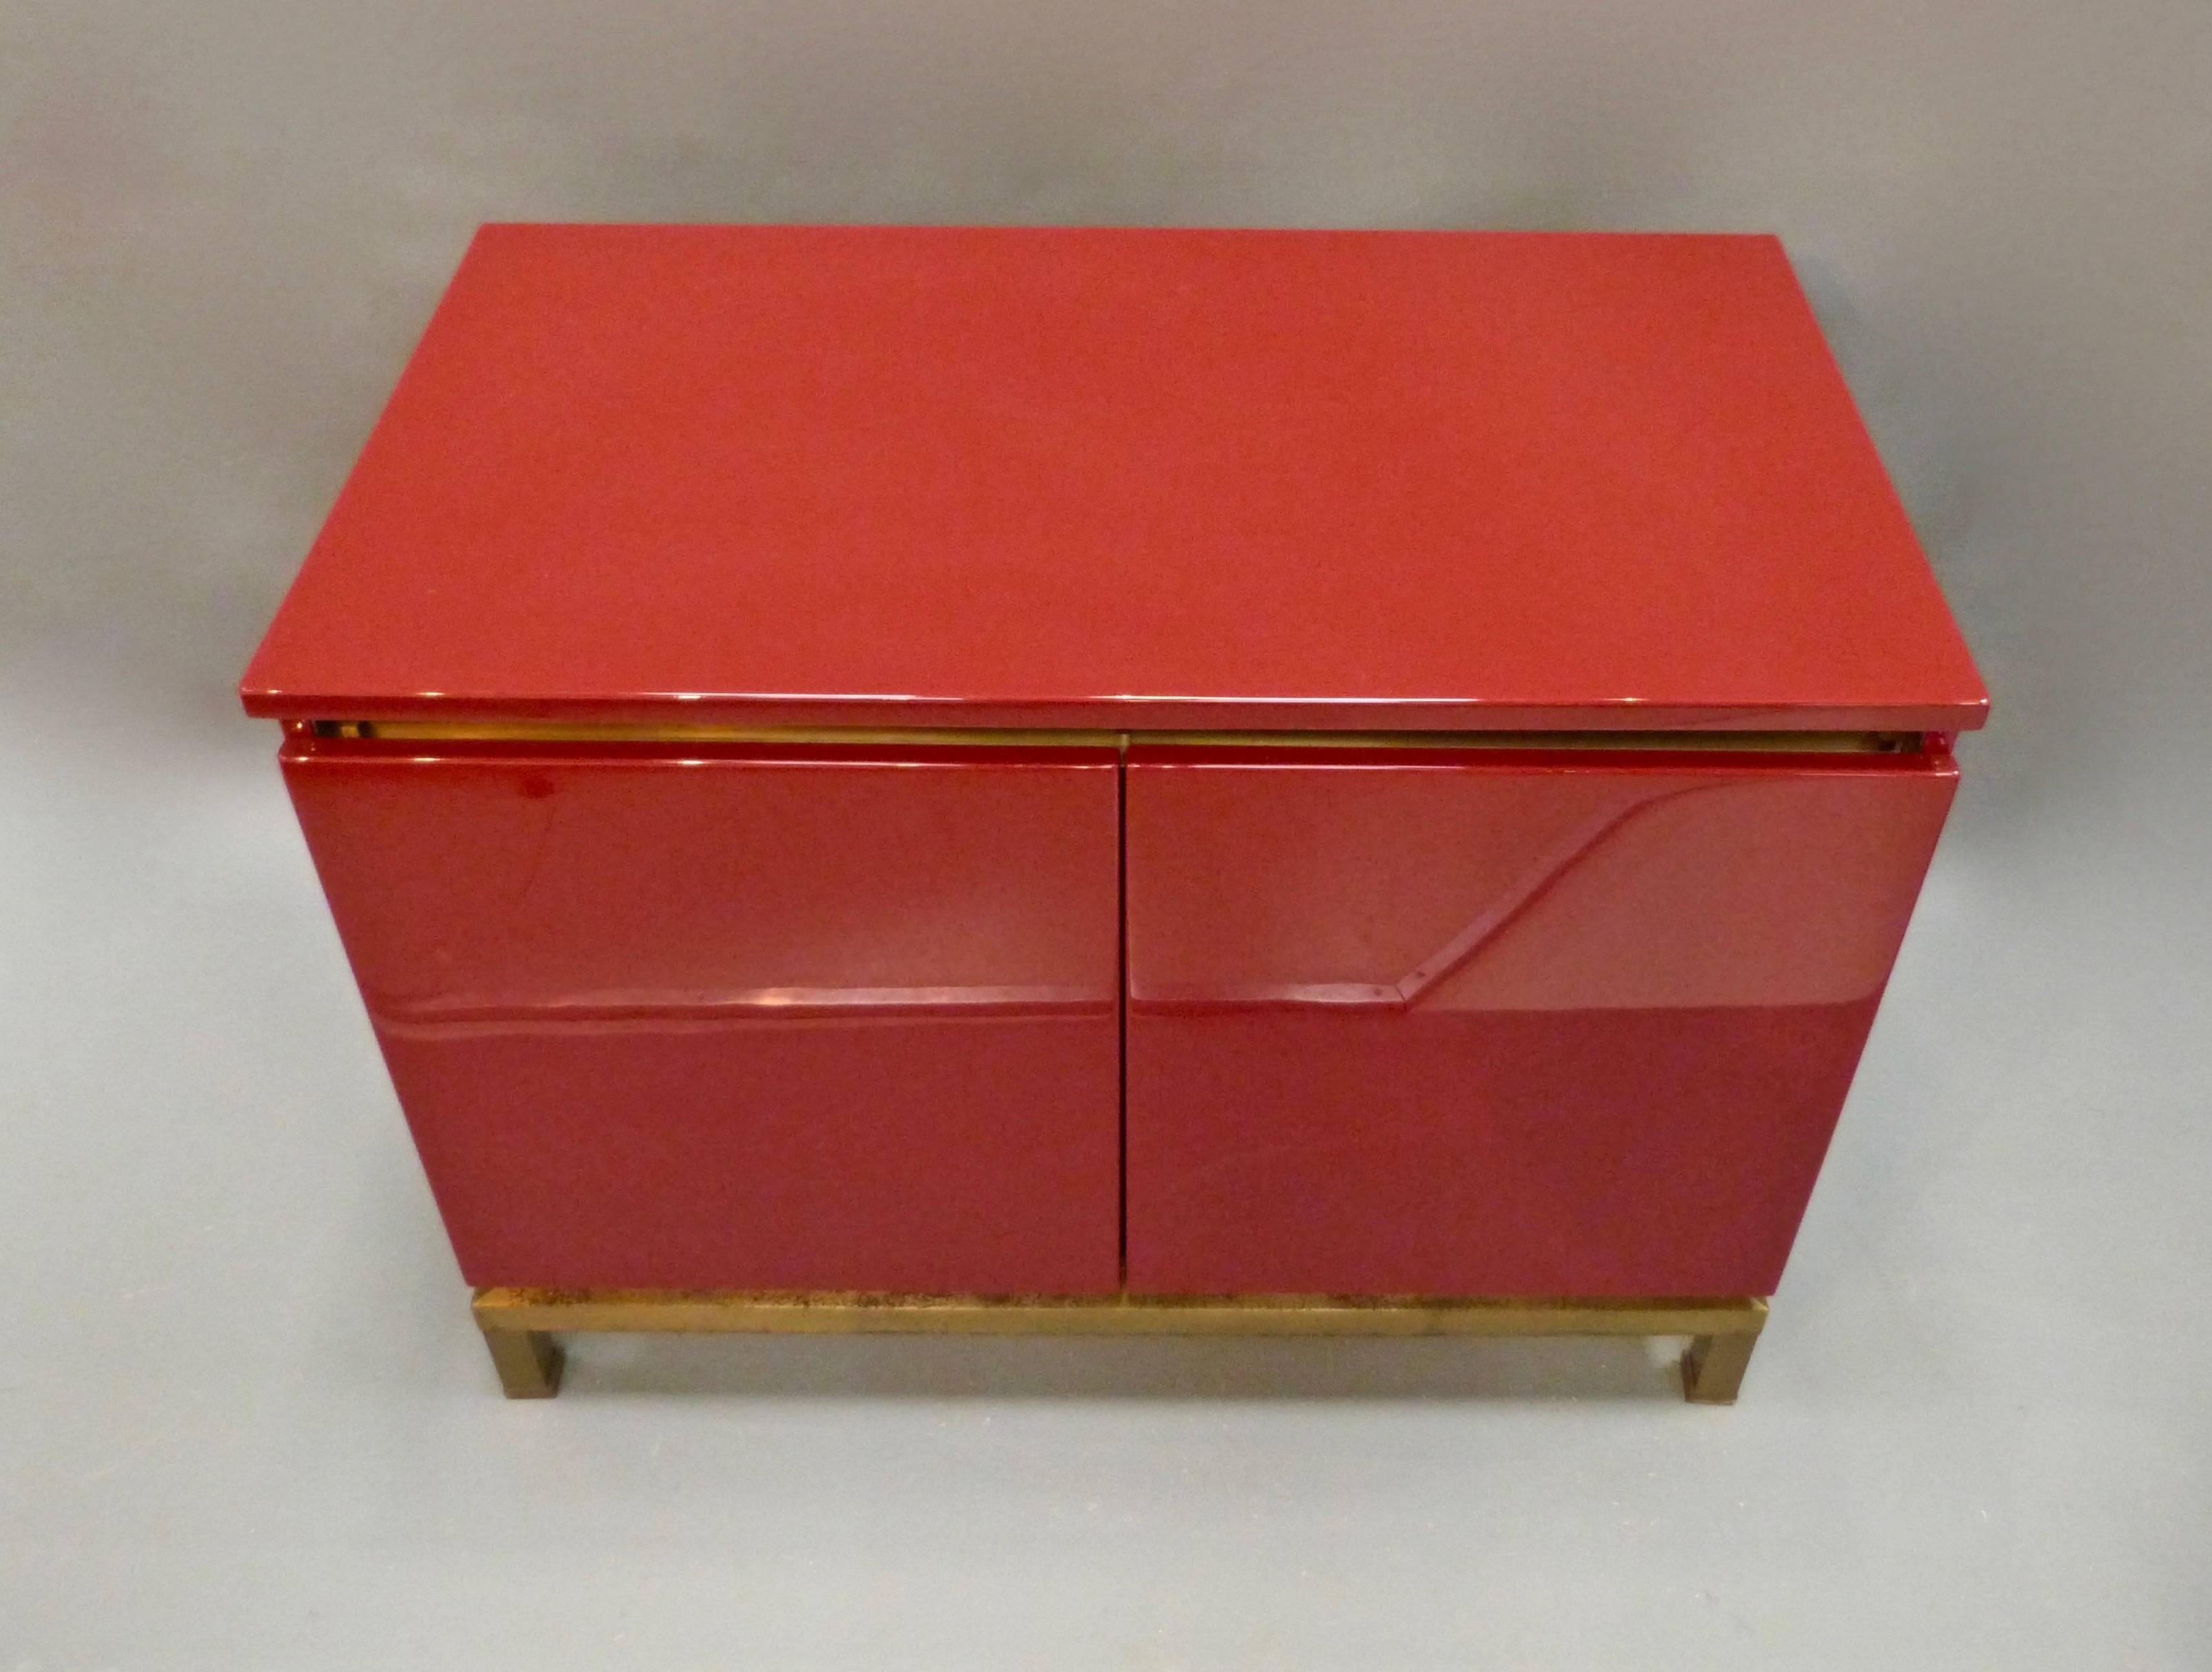 A stunning looking red lacquered two-door cabinet on a gilt metal stand by Guy Lefevre.